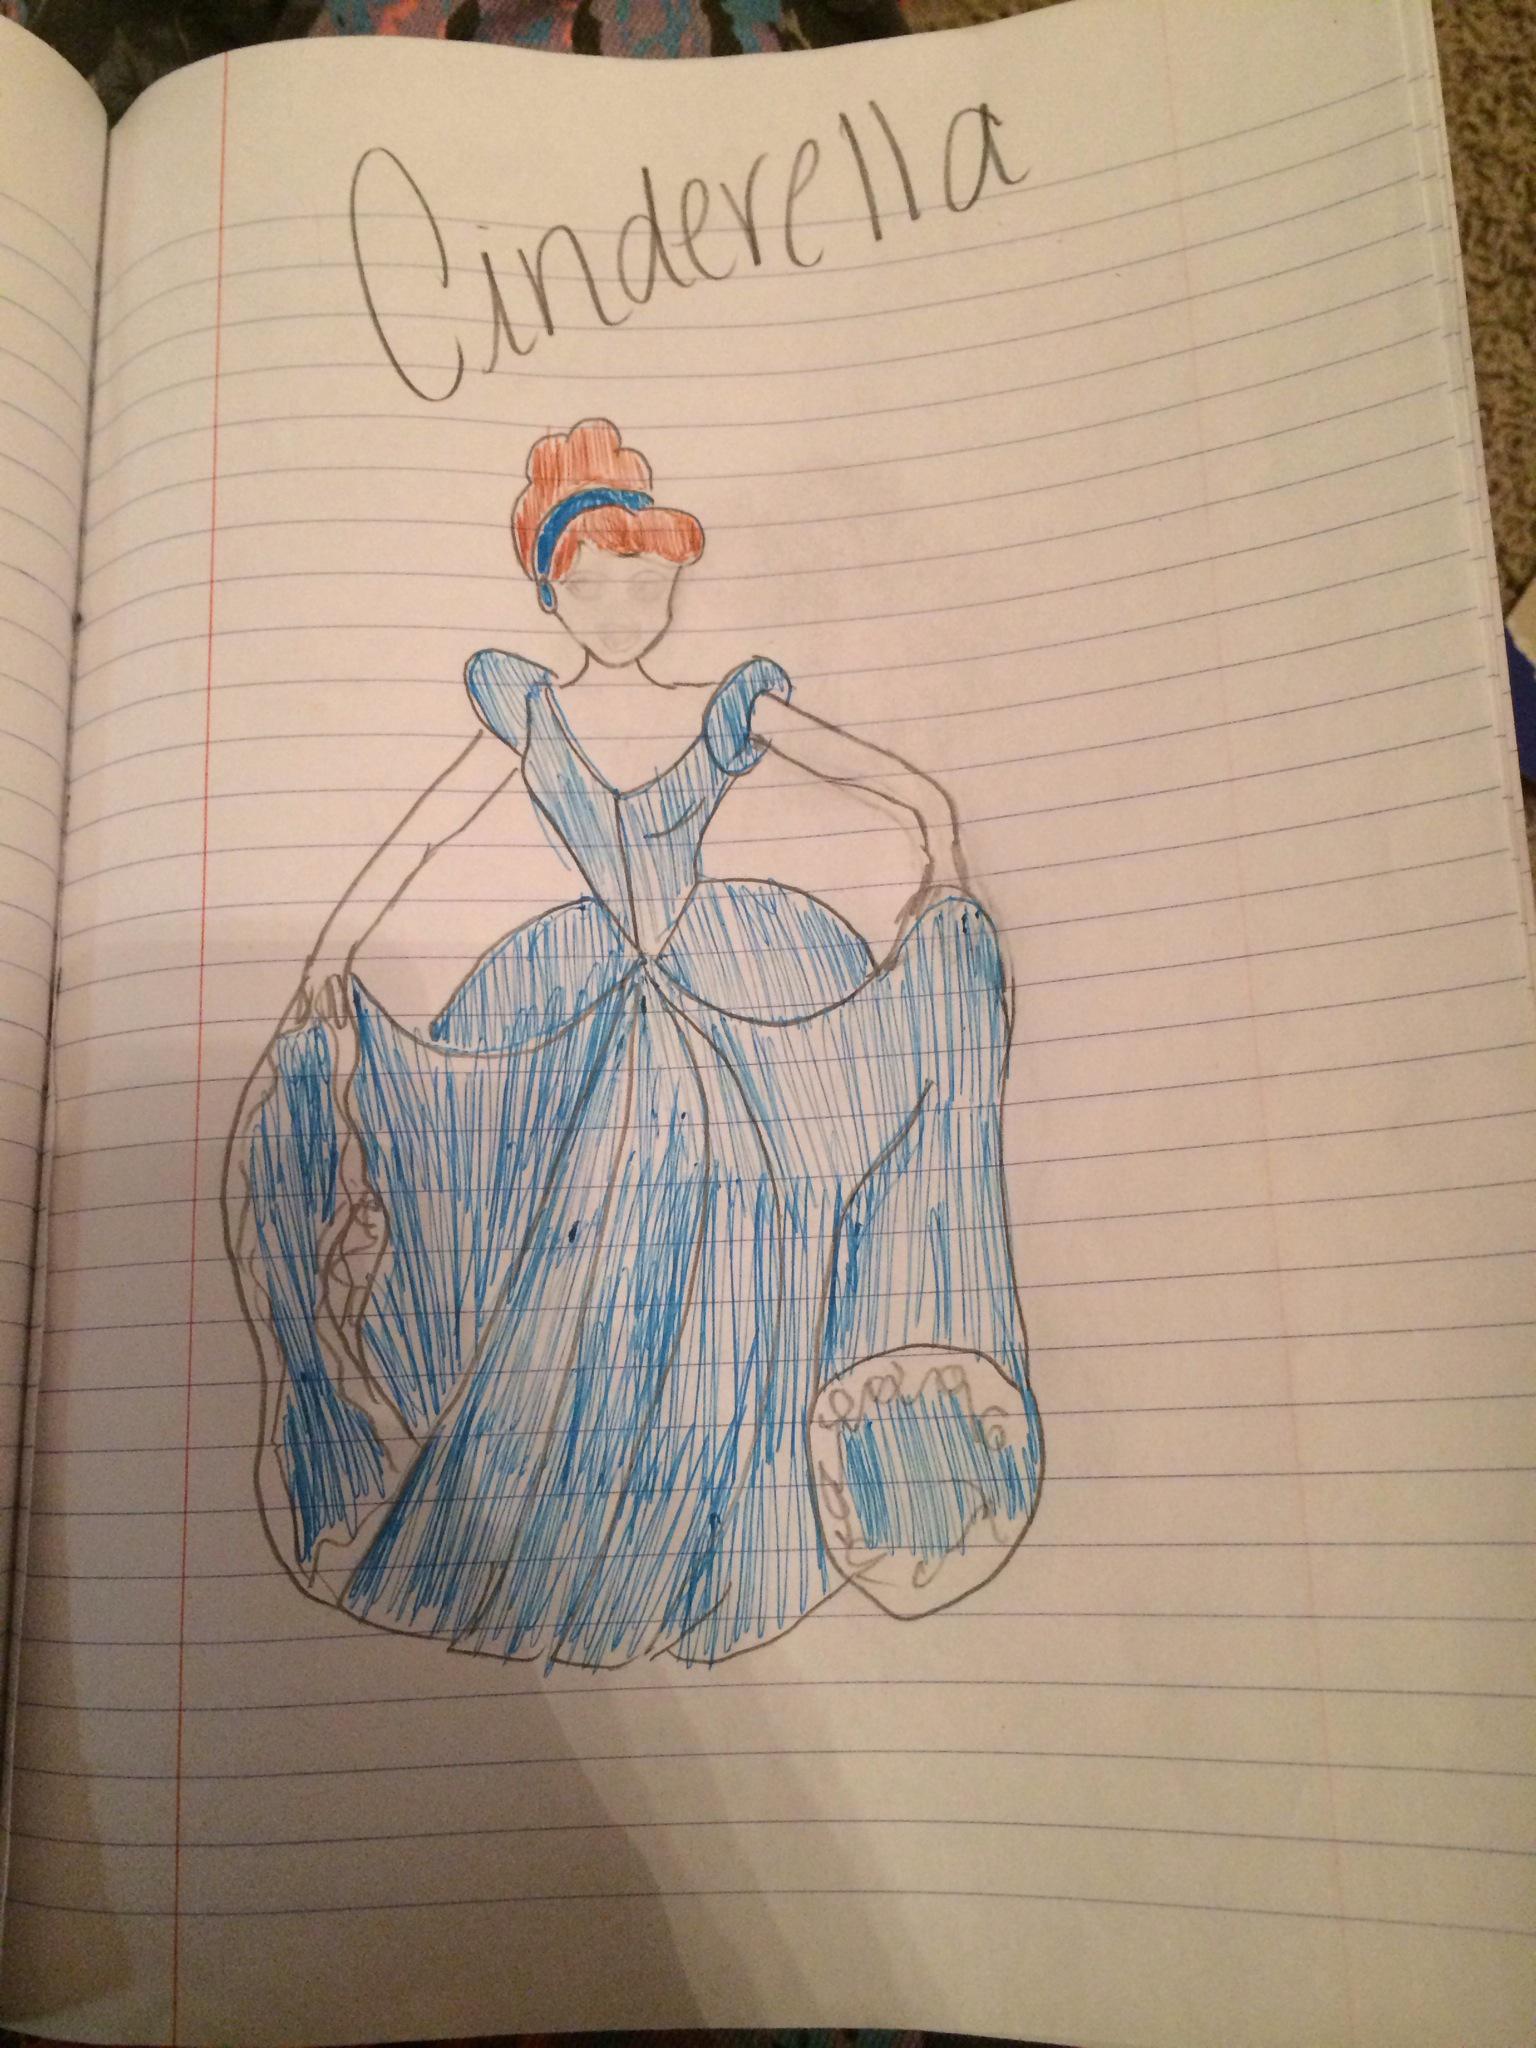 How To Draw A Disney Princess, Cinderella, Step by Step, Drawing Guide, by  Cocoapebbles - DragoArt